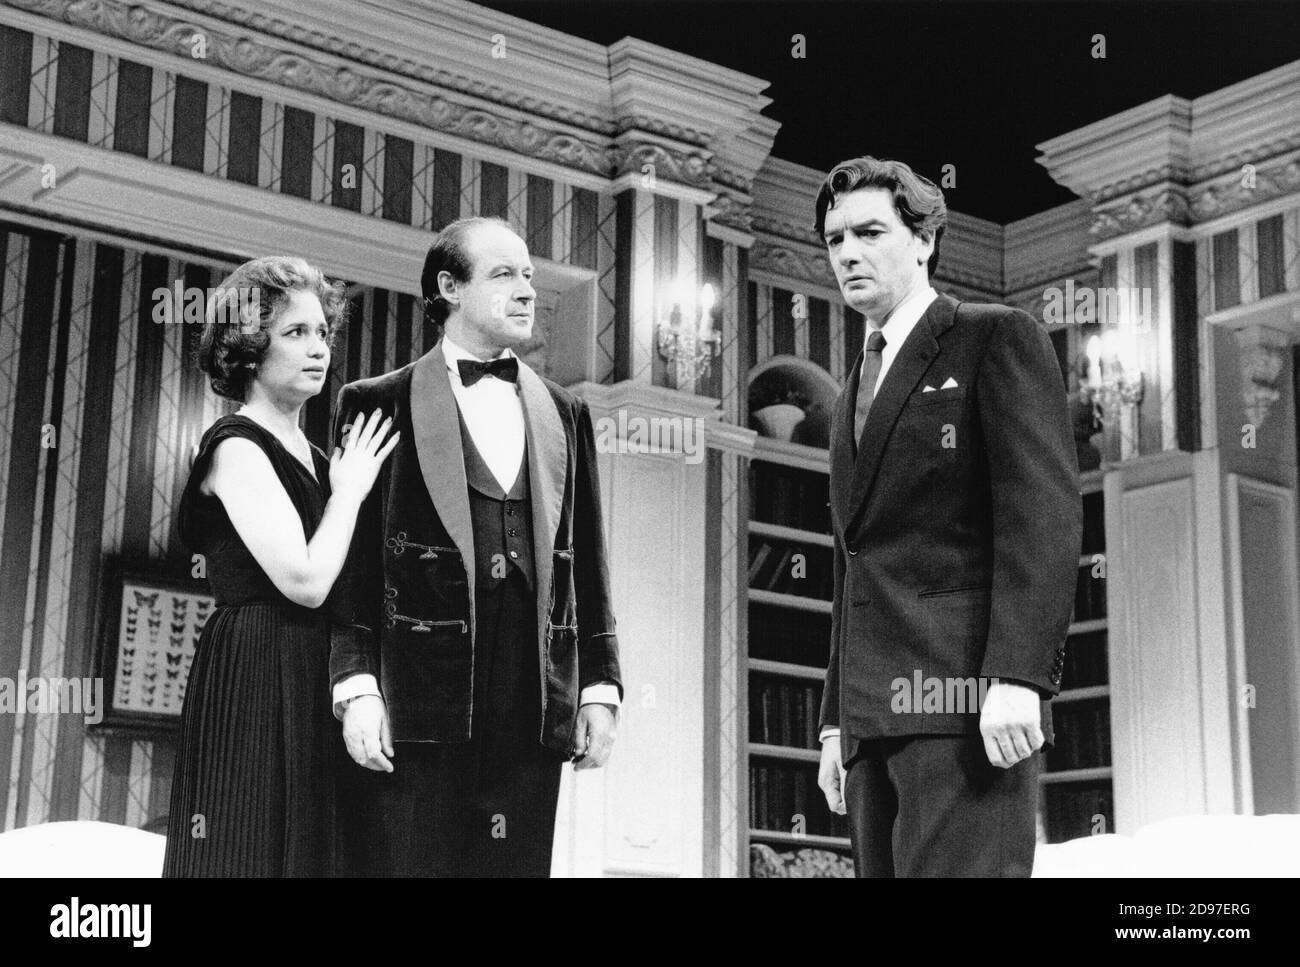 THE COMPLAISANT LOVER by Graham Greene Design: Michael Pavelka Beleuchtung: Robert Ornbo Regie: Richard Olivier l-r: Susan Penhaligon (Mary Rhodes), David Horovitch (Victor Rhodes), Andrew Hawkins (Clive Root) Palace Theatre, Watford, England 08/10/1991 (c) Donald Cooper/PhotoStage photos@photostage.co.uk Ref./BW-P-327-31 Stockfoto